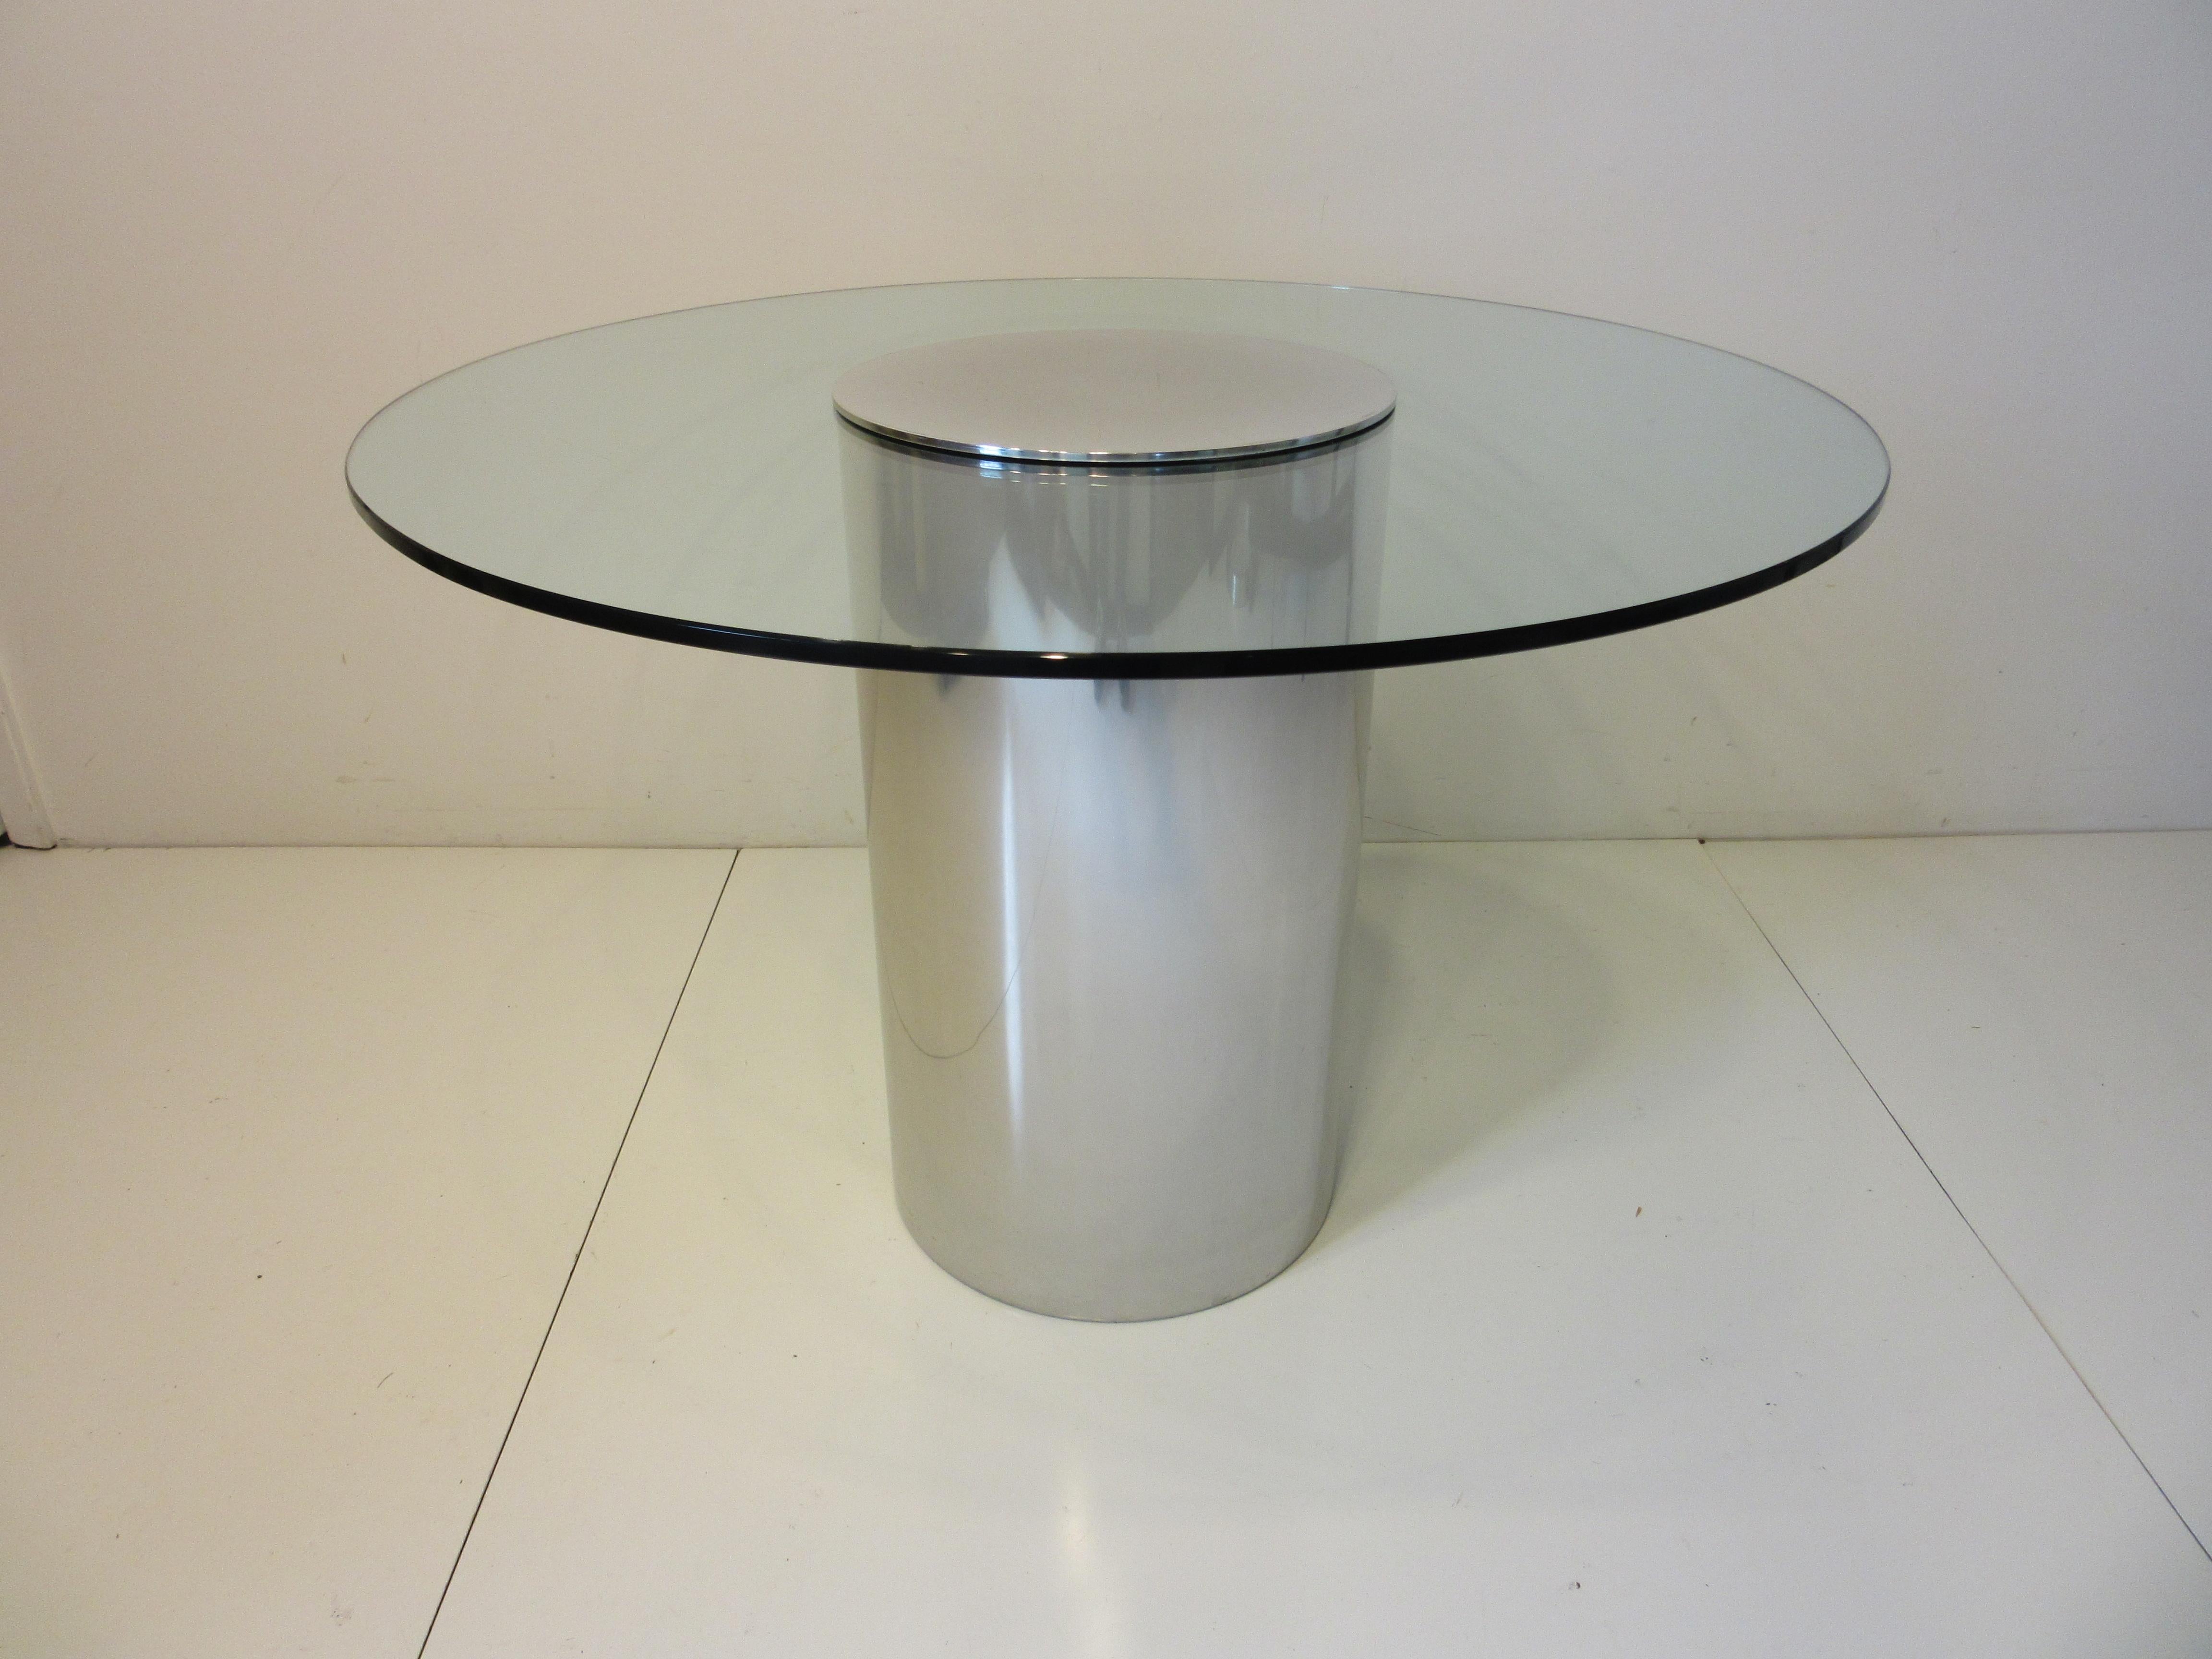 A plate glass topped café dining table with polished aluminum barrel tube base and cap in the manner of Leon Pace and the Pace Furniture company. A rich and simple design from the 1970's that can be used in a tight space eat in kitchen or as a game